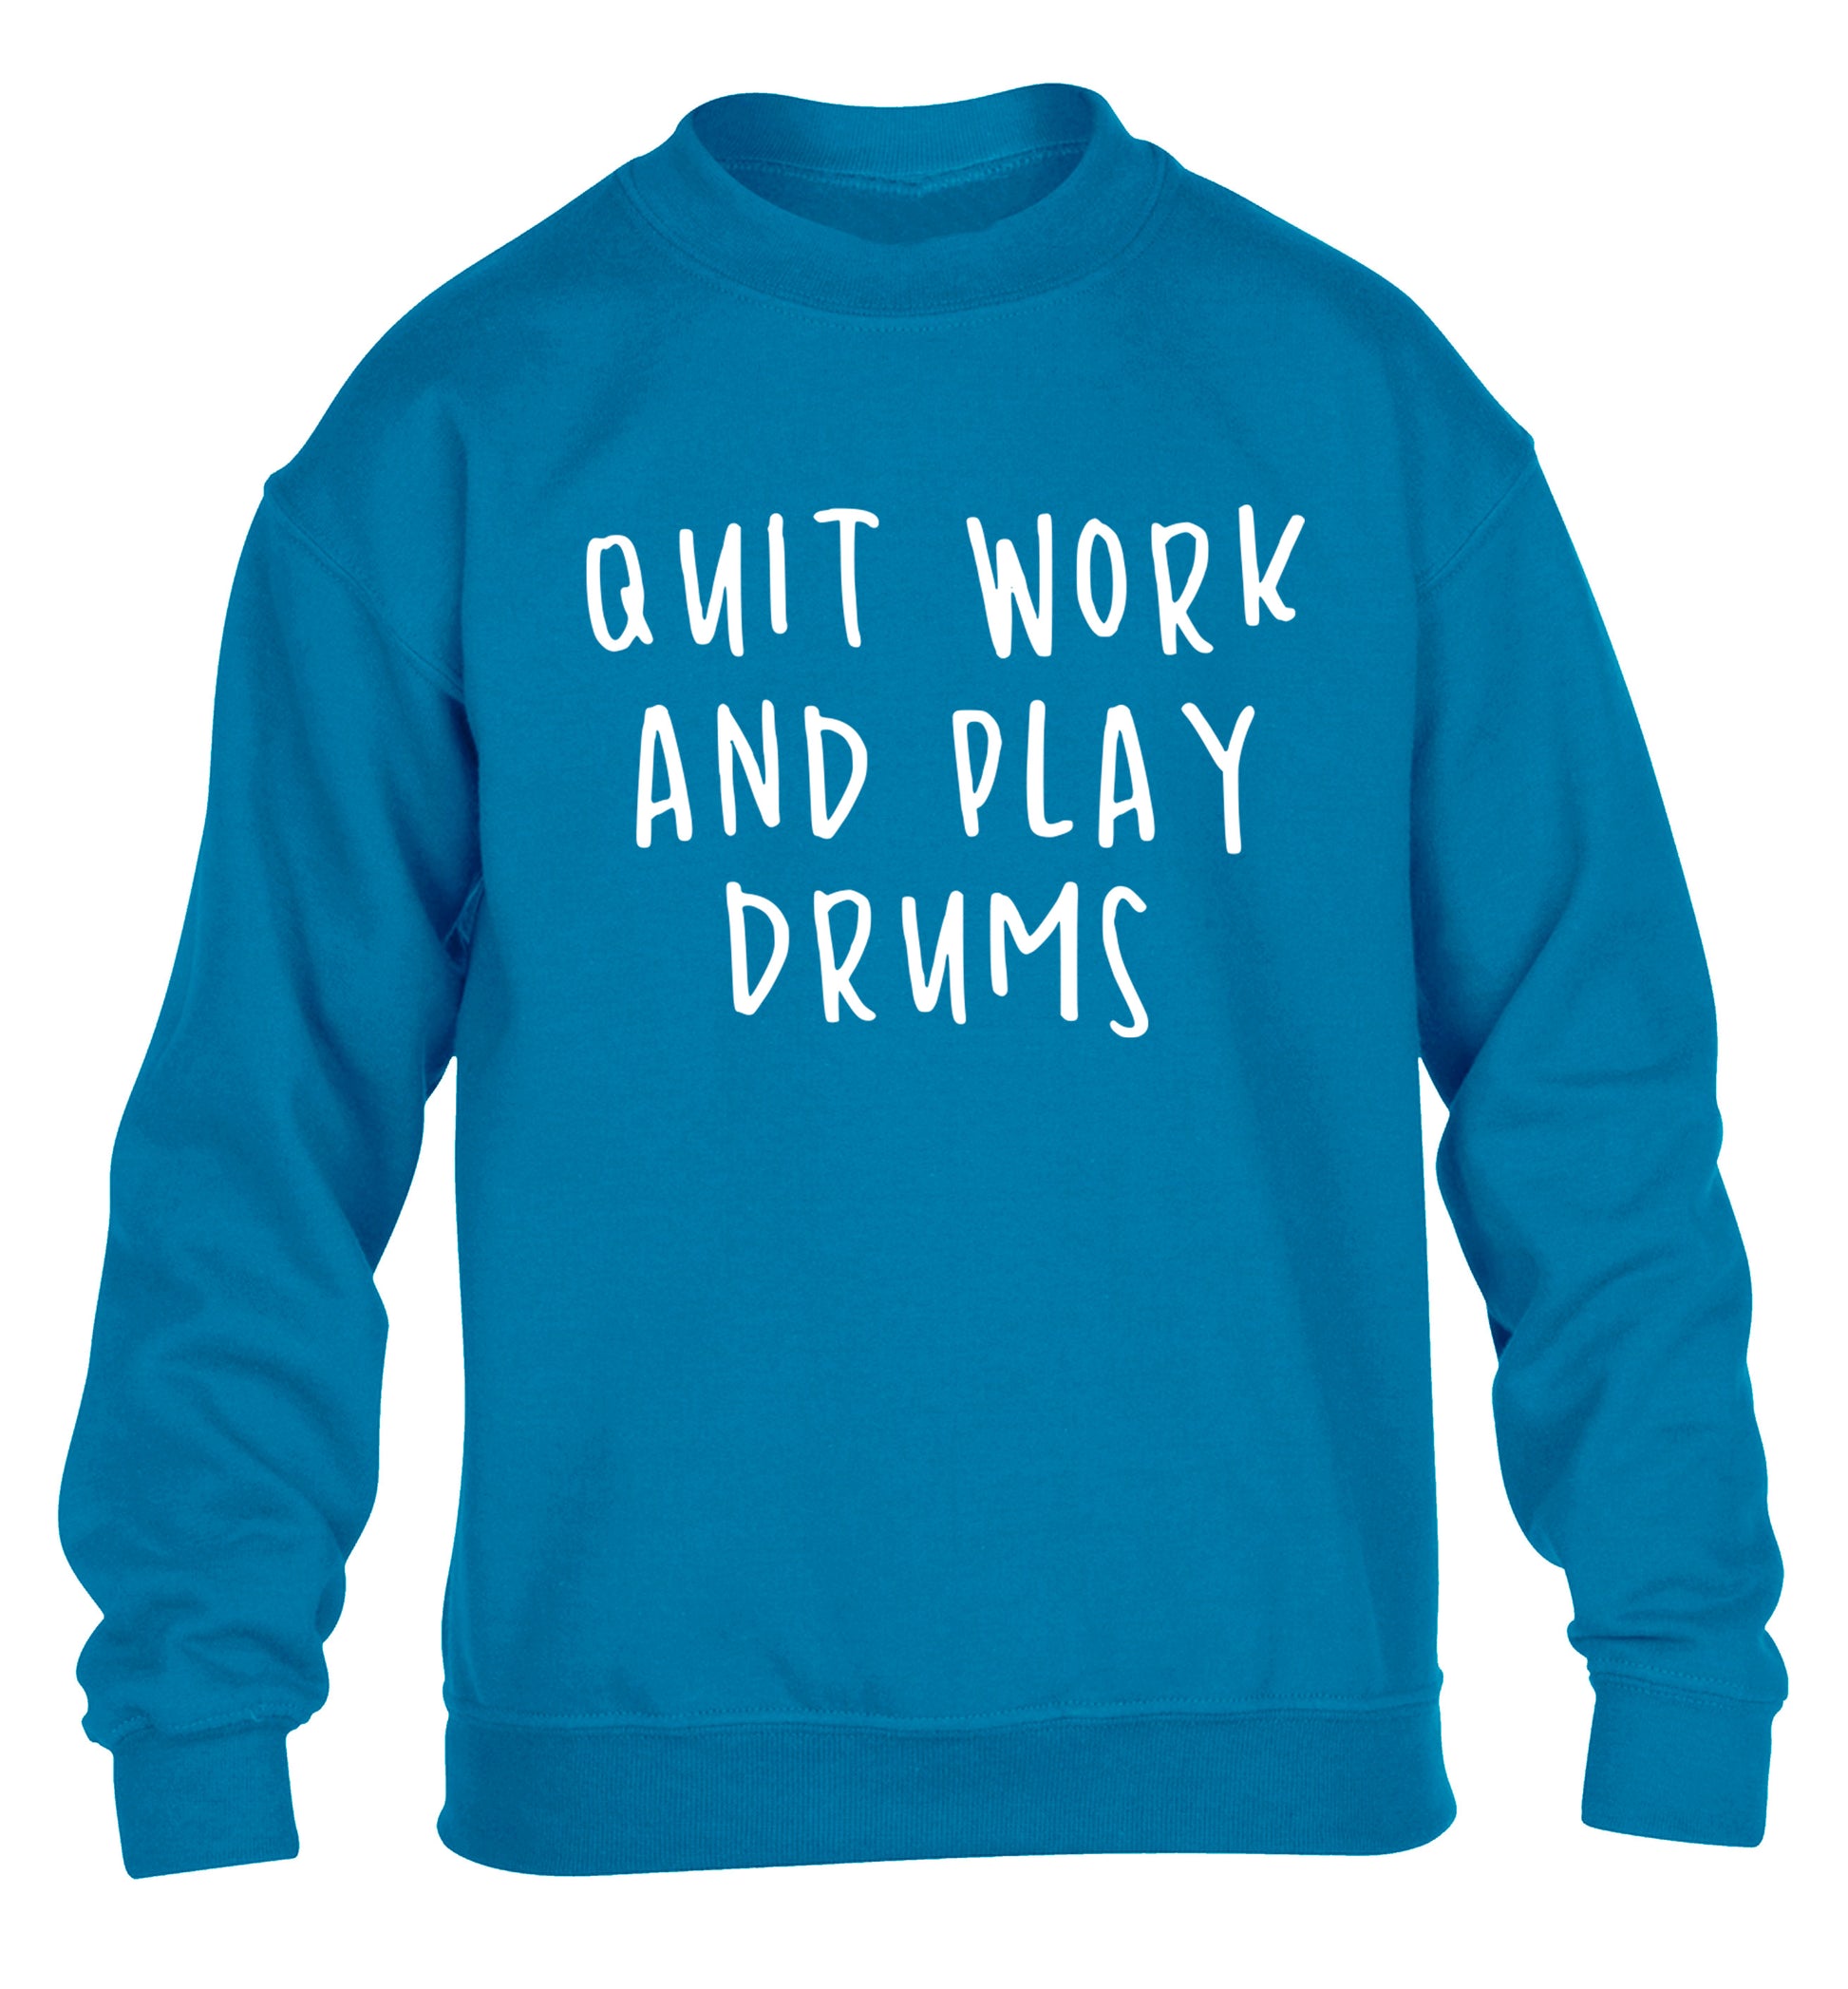 Quit work and play drums children's blue sweater 12-14 Years